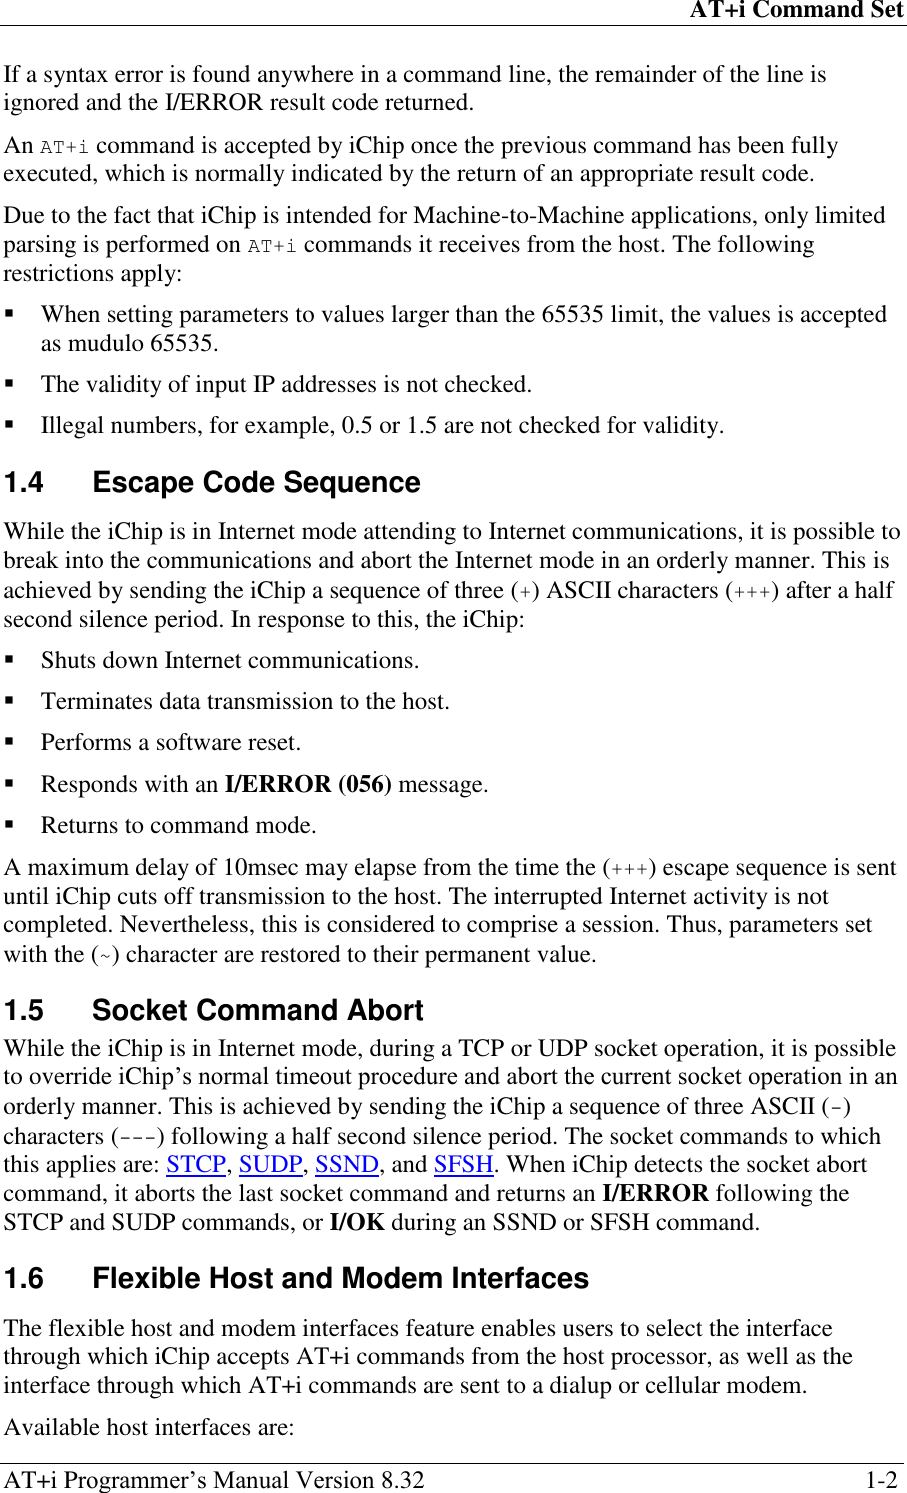 AT+i Command Set AT+i Programmer‘s Manual Version 8.32  1-2 If a syntax error is found anywhere in a command line, the remainder of the line is ignored and the I/ERROR result code returned. An AT+i command is accepted by iChip once the previous command has been fully executed, which is normally indicated by the return of an appropriate result code. Due to the fact that iChip is intended for Machine-to-Machine applications, only limited parsing is performed on AT+i commands it receives from the host. The following restrictions apply:  When setting parameters to values larger than the 65535 limit, the values is accepted as mudulo 65535.  The validity of input IP addresses is not checked.  Illegal numbers, for example, 0.5 or 1.5 are not checked for validity. 1.4  Escape Code Sequence While the iChip is in Internet mode attending to Internet communications, it is possible to break into the communications and abort the Internet mode in an orderly manner. This is achieved by sending the iChip a sequence of three (+) ASCII characters (+++) after a half second silence period. In response to this, the iChip:  Shuts down Internet communications.  Terminates data transmission to the host.  Performs a software reset.  Responds with an I/ERROR (056) message.  Returns to command mode. A maximum delay of 10msec may elapse from the time the (+++) escape sequence is sent until iChip cuts off transmission to the host. The interrupted Internet activity is not completed. Nevertheless, this is considered to comprise a session. Thus, parameters set with the (~) character are restored to their permanent value. 1.5  Socket Command Abort While the iChip is in Internet mode, during a TCP or UDP socket operation, it is possible to override iChip‘s normal timeout procedure and abort the current socket operation in an orderly manner. This is achieved by sending the iChip a sequence of three ASCII (-) characters (---) following a half second silence period. The socket commands to which this applies are: STCP, SUDP, SSND, and SFSH. When iChip detects the socket abort command, it aborts the last socket command and returns an I/ERROR following the STCP and SUDP commands, or I/OK during an SSND or SFSH command. 1.6  Flexible Host and Modem Interfaces The flexible host and modem interfaces feature enables users to select the interface through which iChip accepts AT+i commands from the host processor, as well as the interface through which AT+i commands are sent to a dialup or cellular modem. Available host interfaces are: 